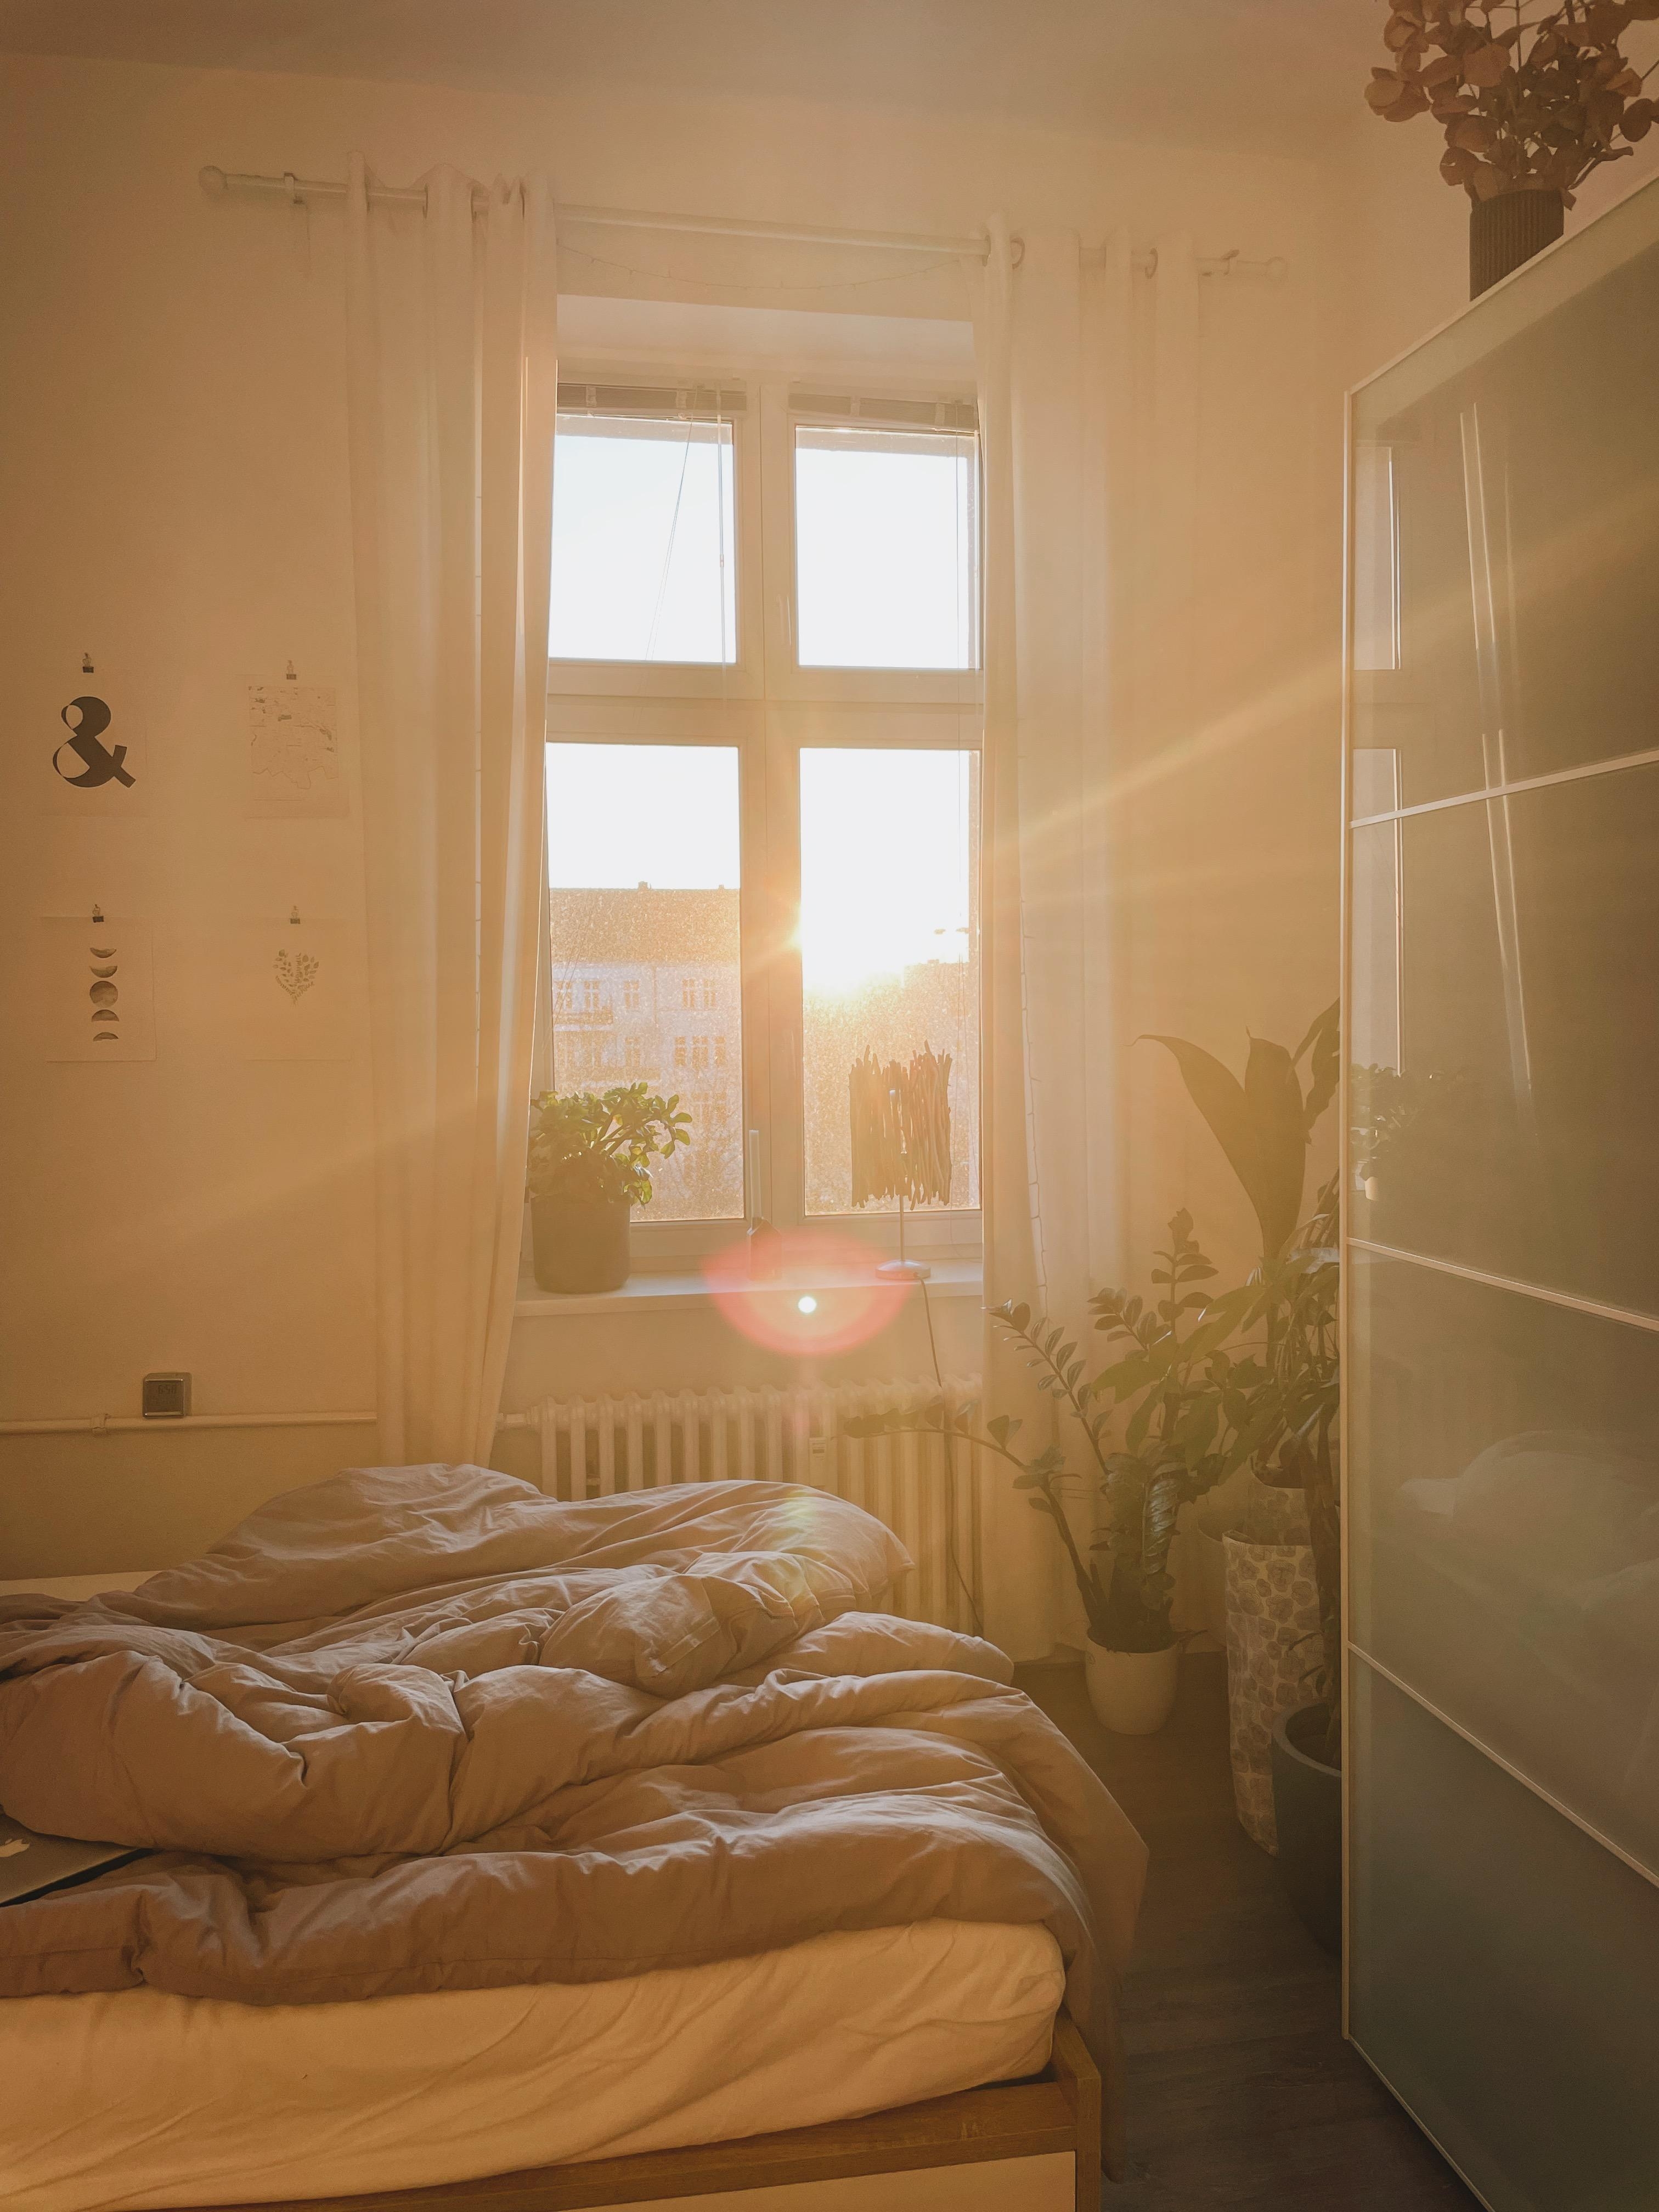 Mornings like this 🥰 #sonnenaufgang #sonne #licht #schlafzimmer